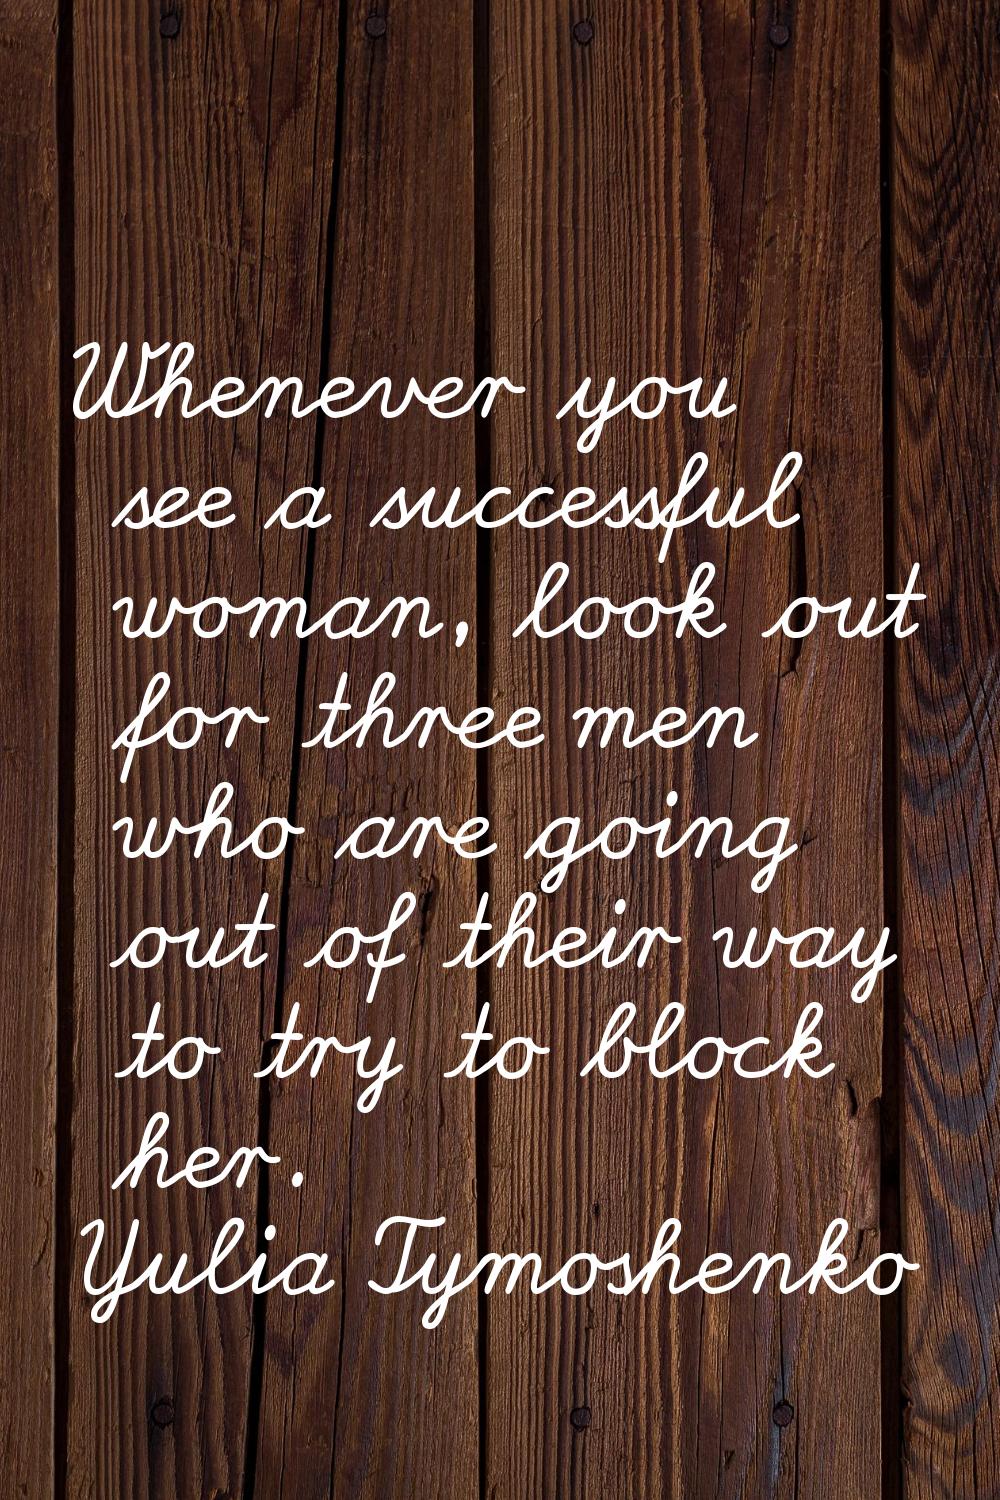 Whenever you see a successful woman, look out for three men who are going out of their way to try t